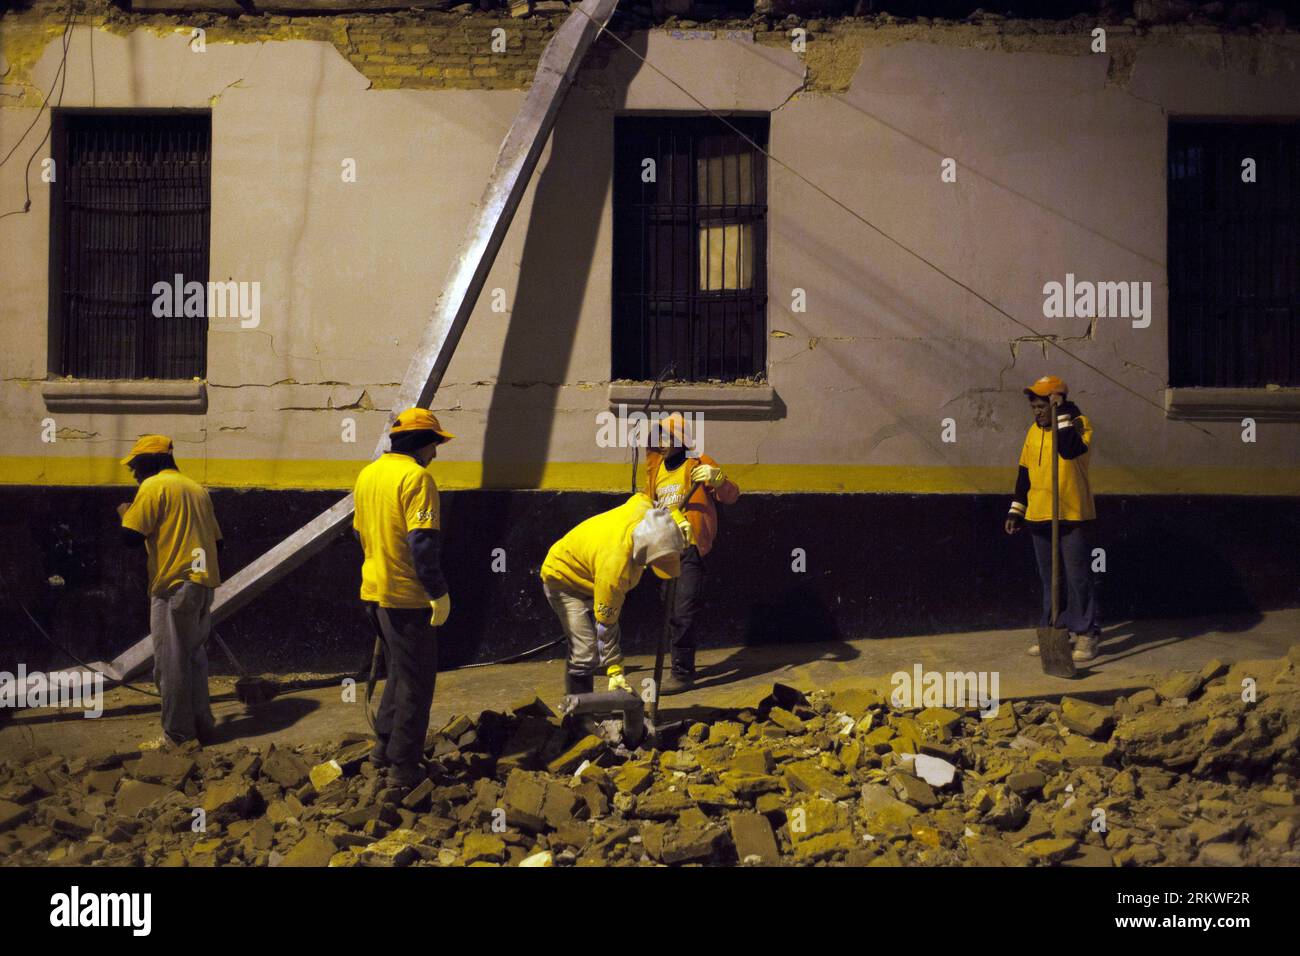 Bildnummer: 58676841  Datum: 07.11.2012  Copyright: imago/Xinhua SAN MARCOS, (Xinhua) -- Employees clean the debris left after an earthquake, in San Marcos, Guatemala, on Nov. 7, 2012. A 7.4 degree on the Richter scale earthquake affected Guatemala on Wednesday, the epicenter was located at sea, 24 km south of Champerico port municipalty, Guatemala, according to United States Geologic Service (USGS) data. (Xinhua/Luis Echeverr¨ªa) (le) (rh) (ce) GUATEMALA-SAN MARCOS-ENVIRONMENT-EARTHQUAKE PUBLICATIONxNOTxINxCHN Gesellschaft Erdbeben Aufräumarbeiten Natarkatastrophe premiumd x0x xac 2012 quer Stock Photo